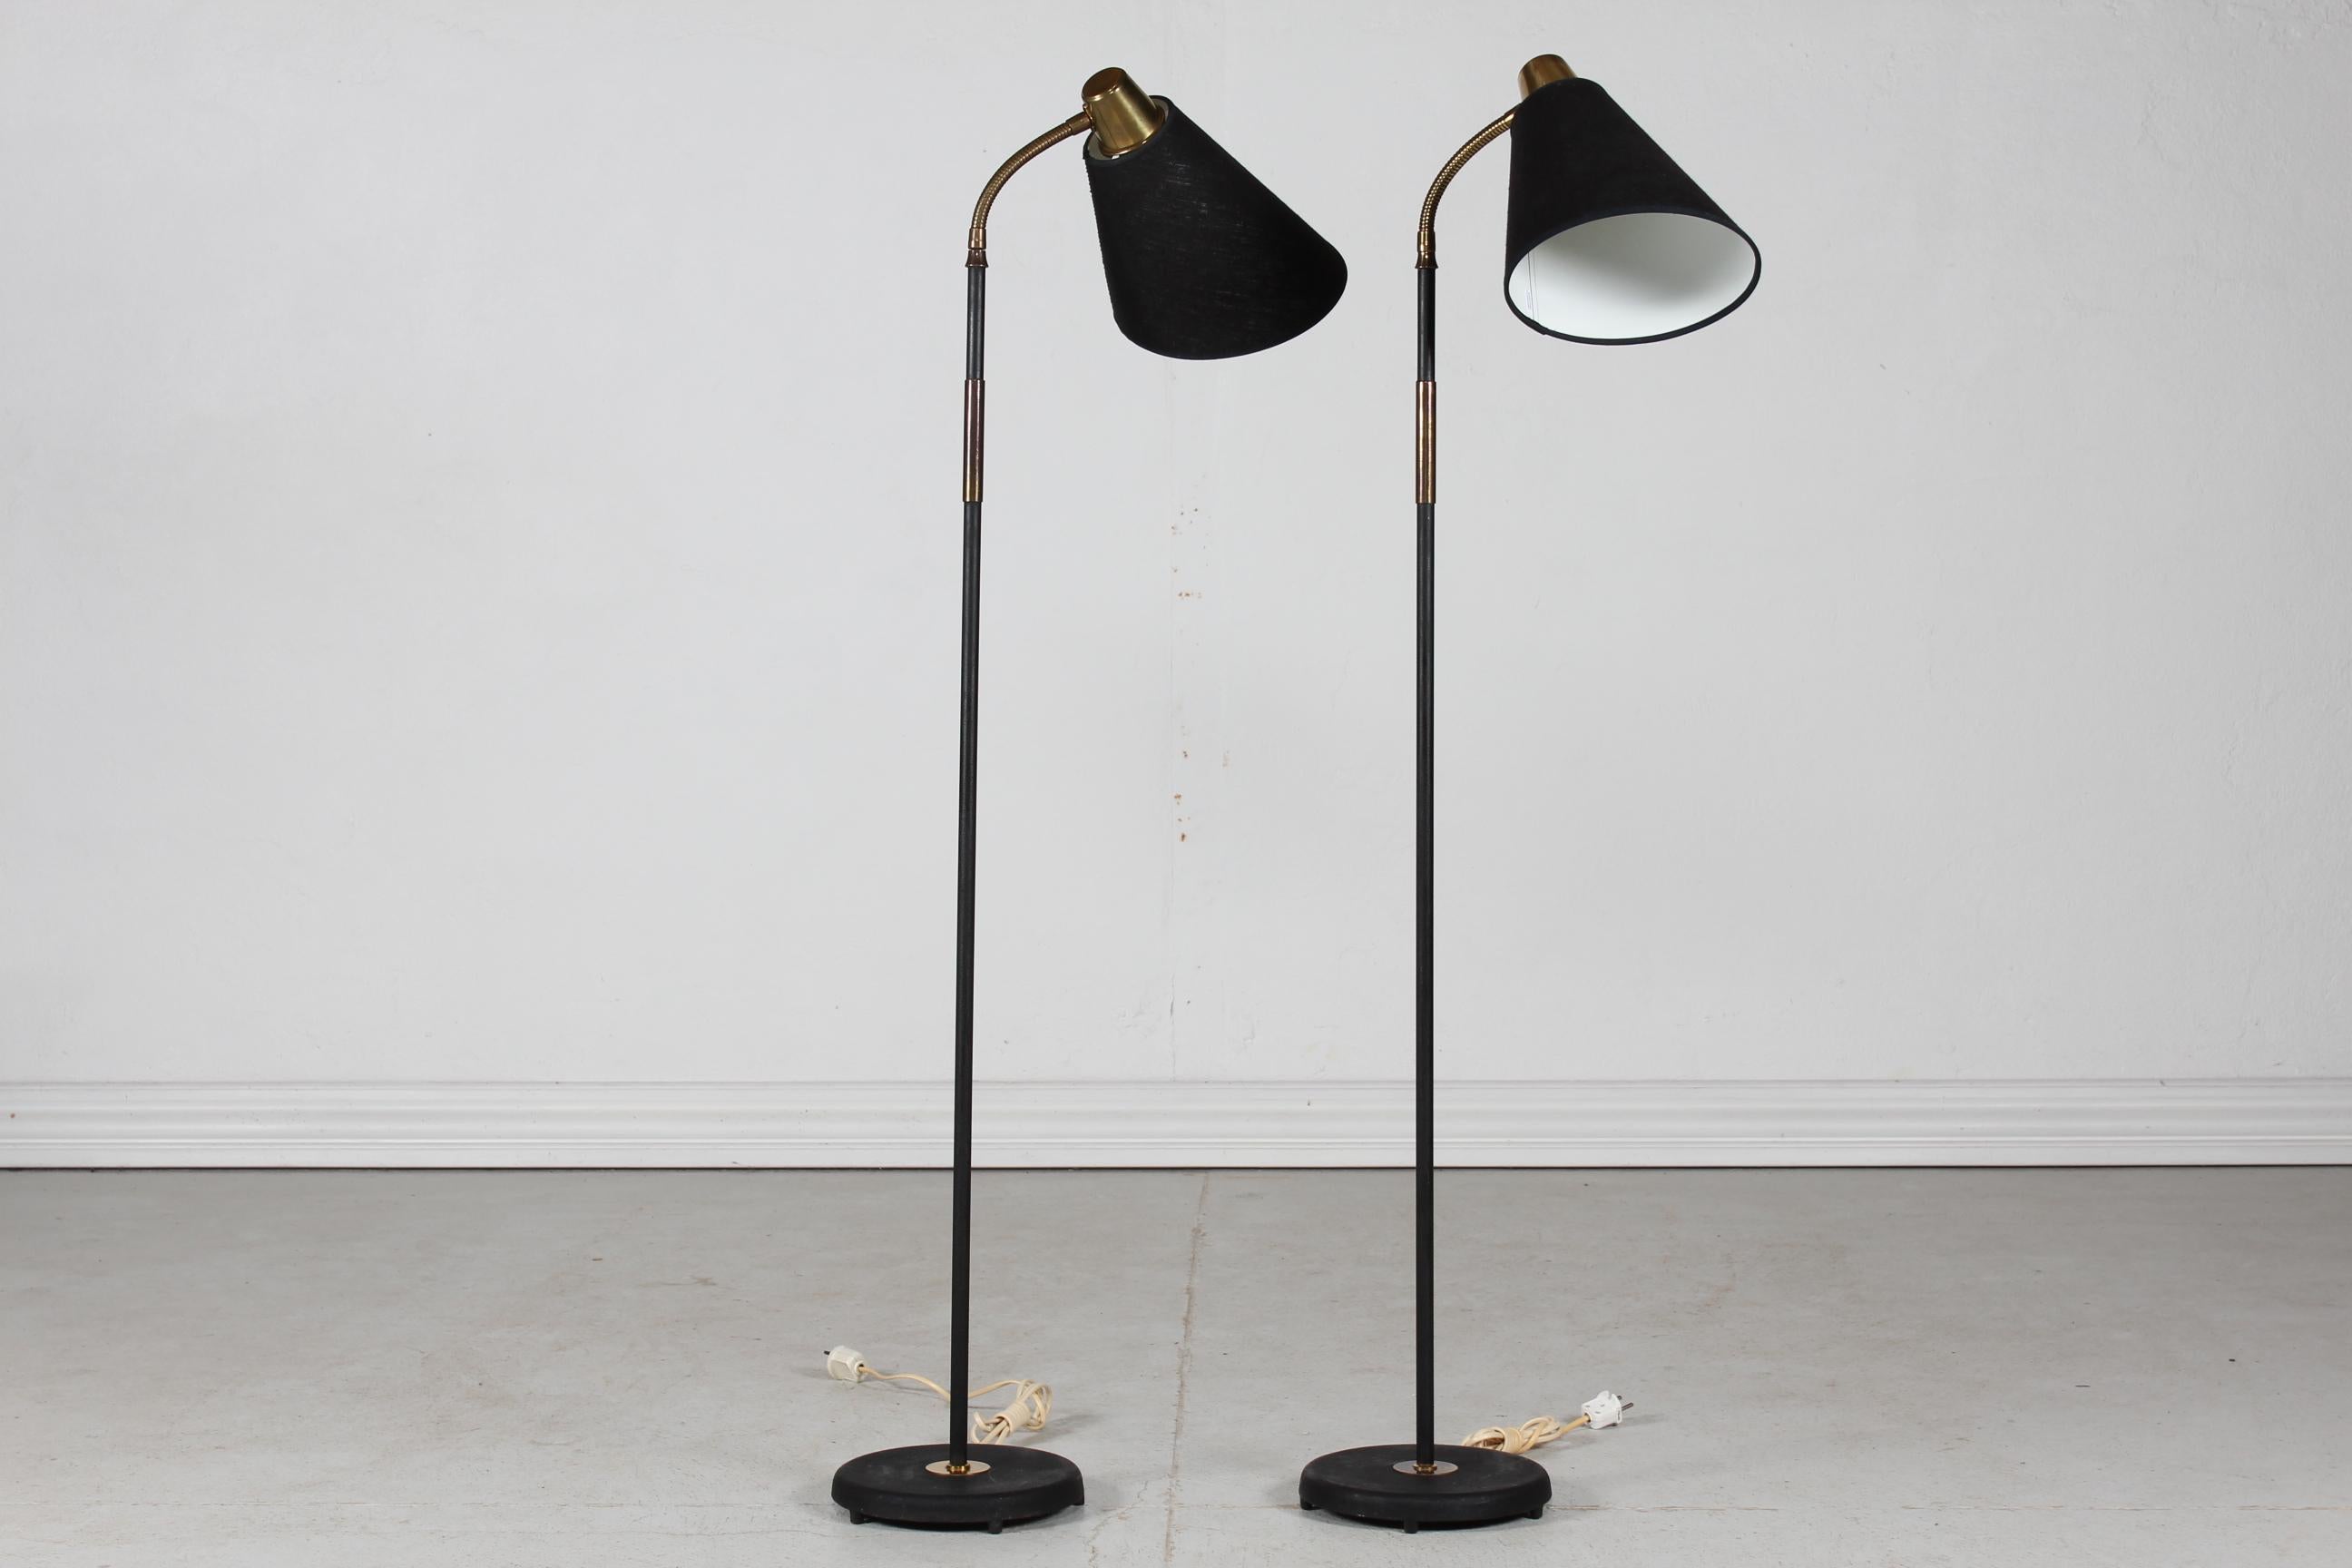 Scandinavian light design.
Pair of floor lamps 1940s made of metal with black lacquer, frame mounted with brass. 
The newer oblique cut lampshades are made of black woven fabric.

From the same period and in the style of Josef Frank - Paavo